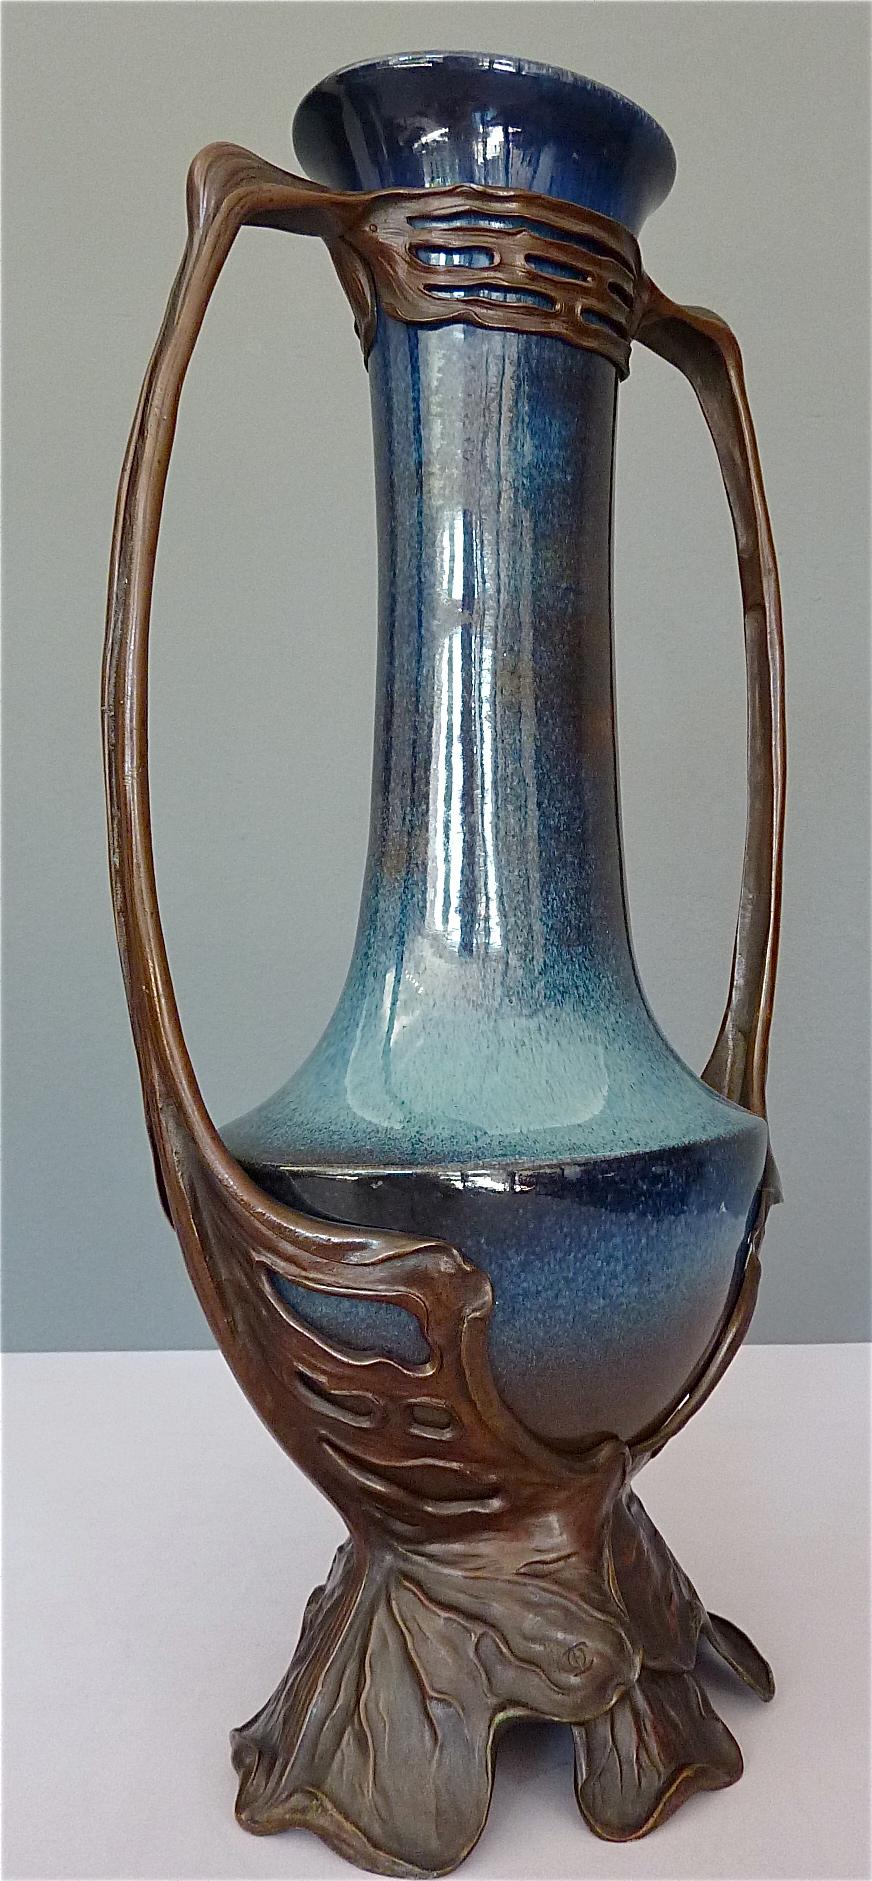 Important large Jugendstil / Art Nouveau Waterlily bronze mounted vase designed by Otto Eckmann, circa 1898 featuring a patinated bronze mount by Otto Schulz, featuring a deep to light brown-flecked, light aqua blue to royal deep blue glazed